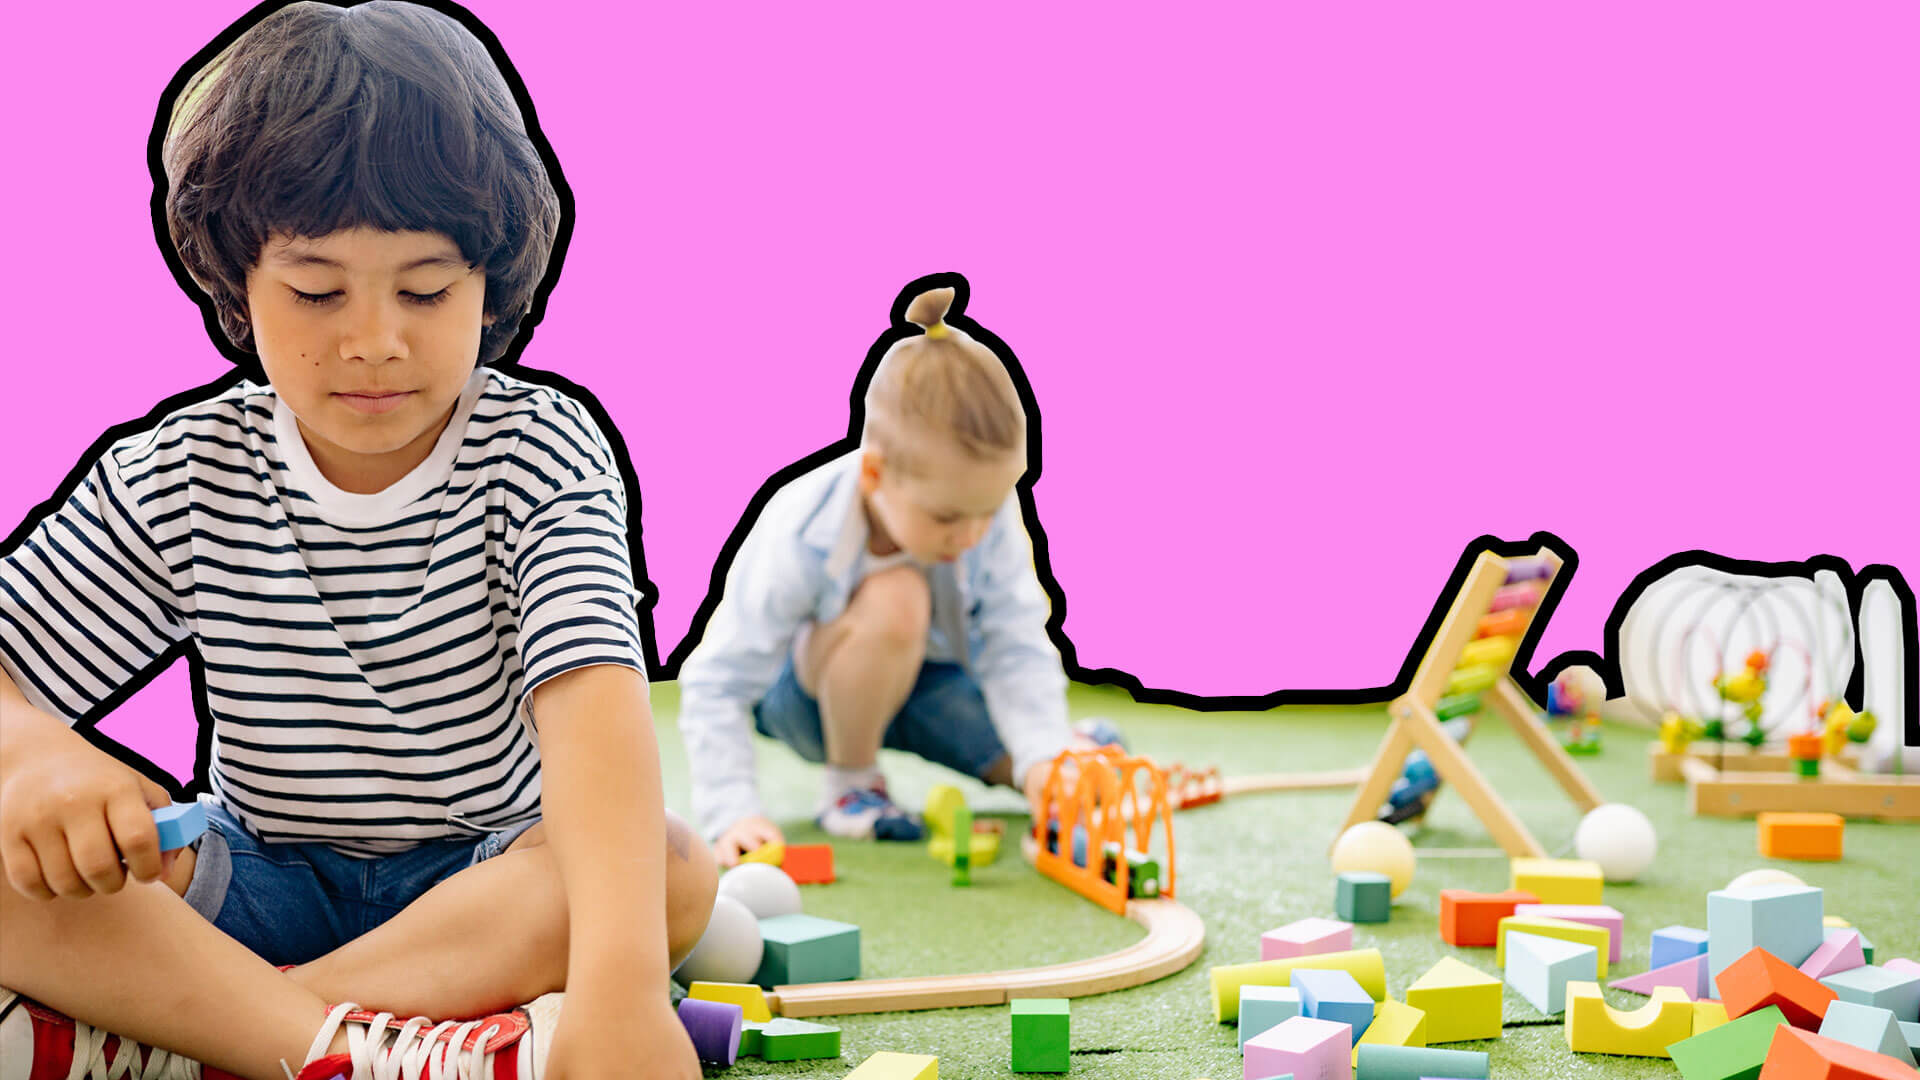 https://app.dropinblog.com/uploaded/blogs/34242946/files/5_Reasons_Why_Toys_Bore_Kids/Two-boys-playing-with-too-many-toys.jpg